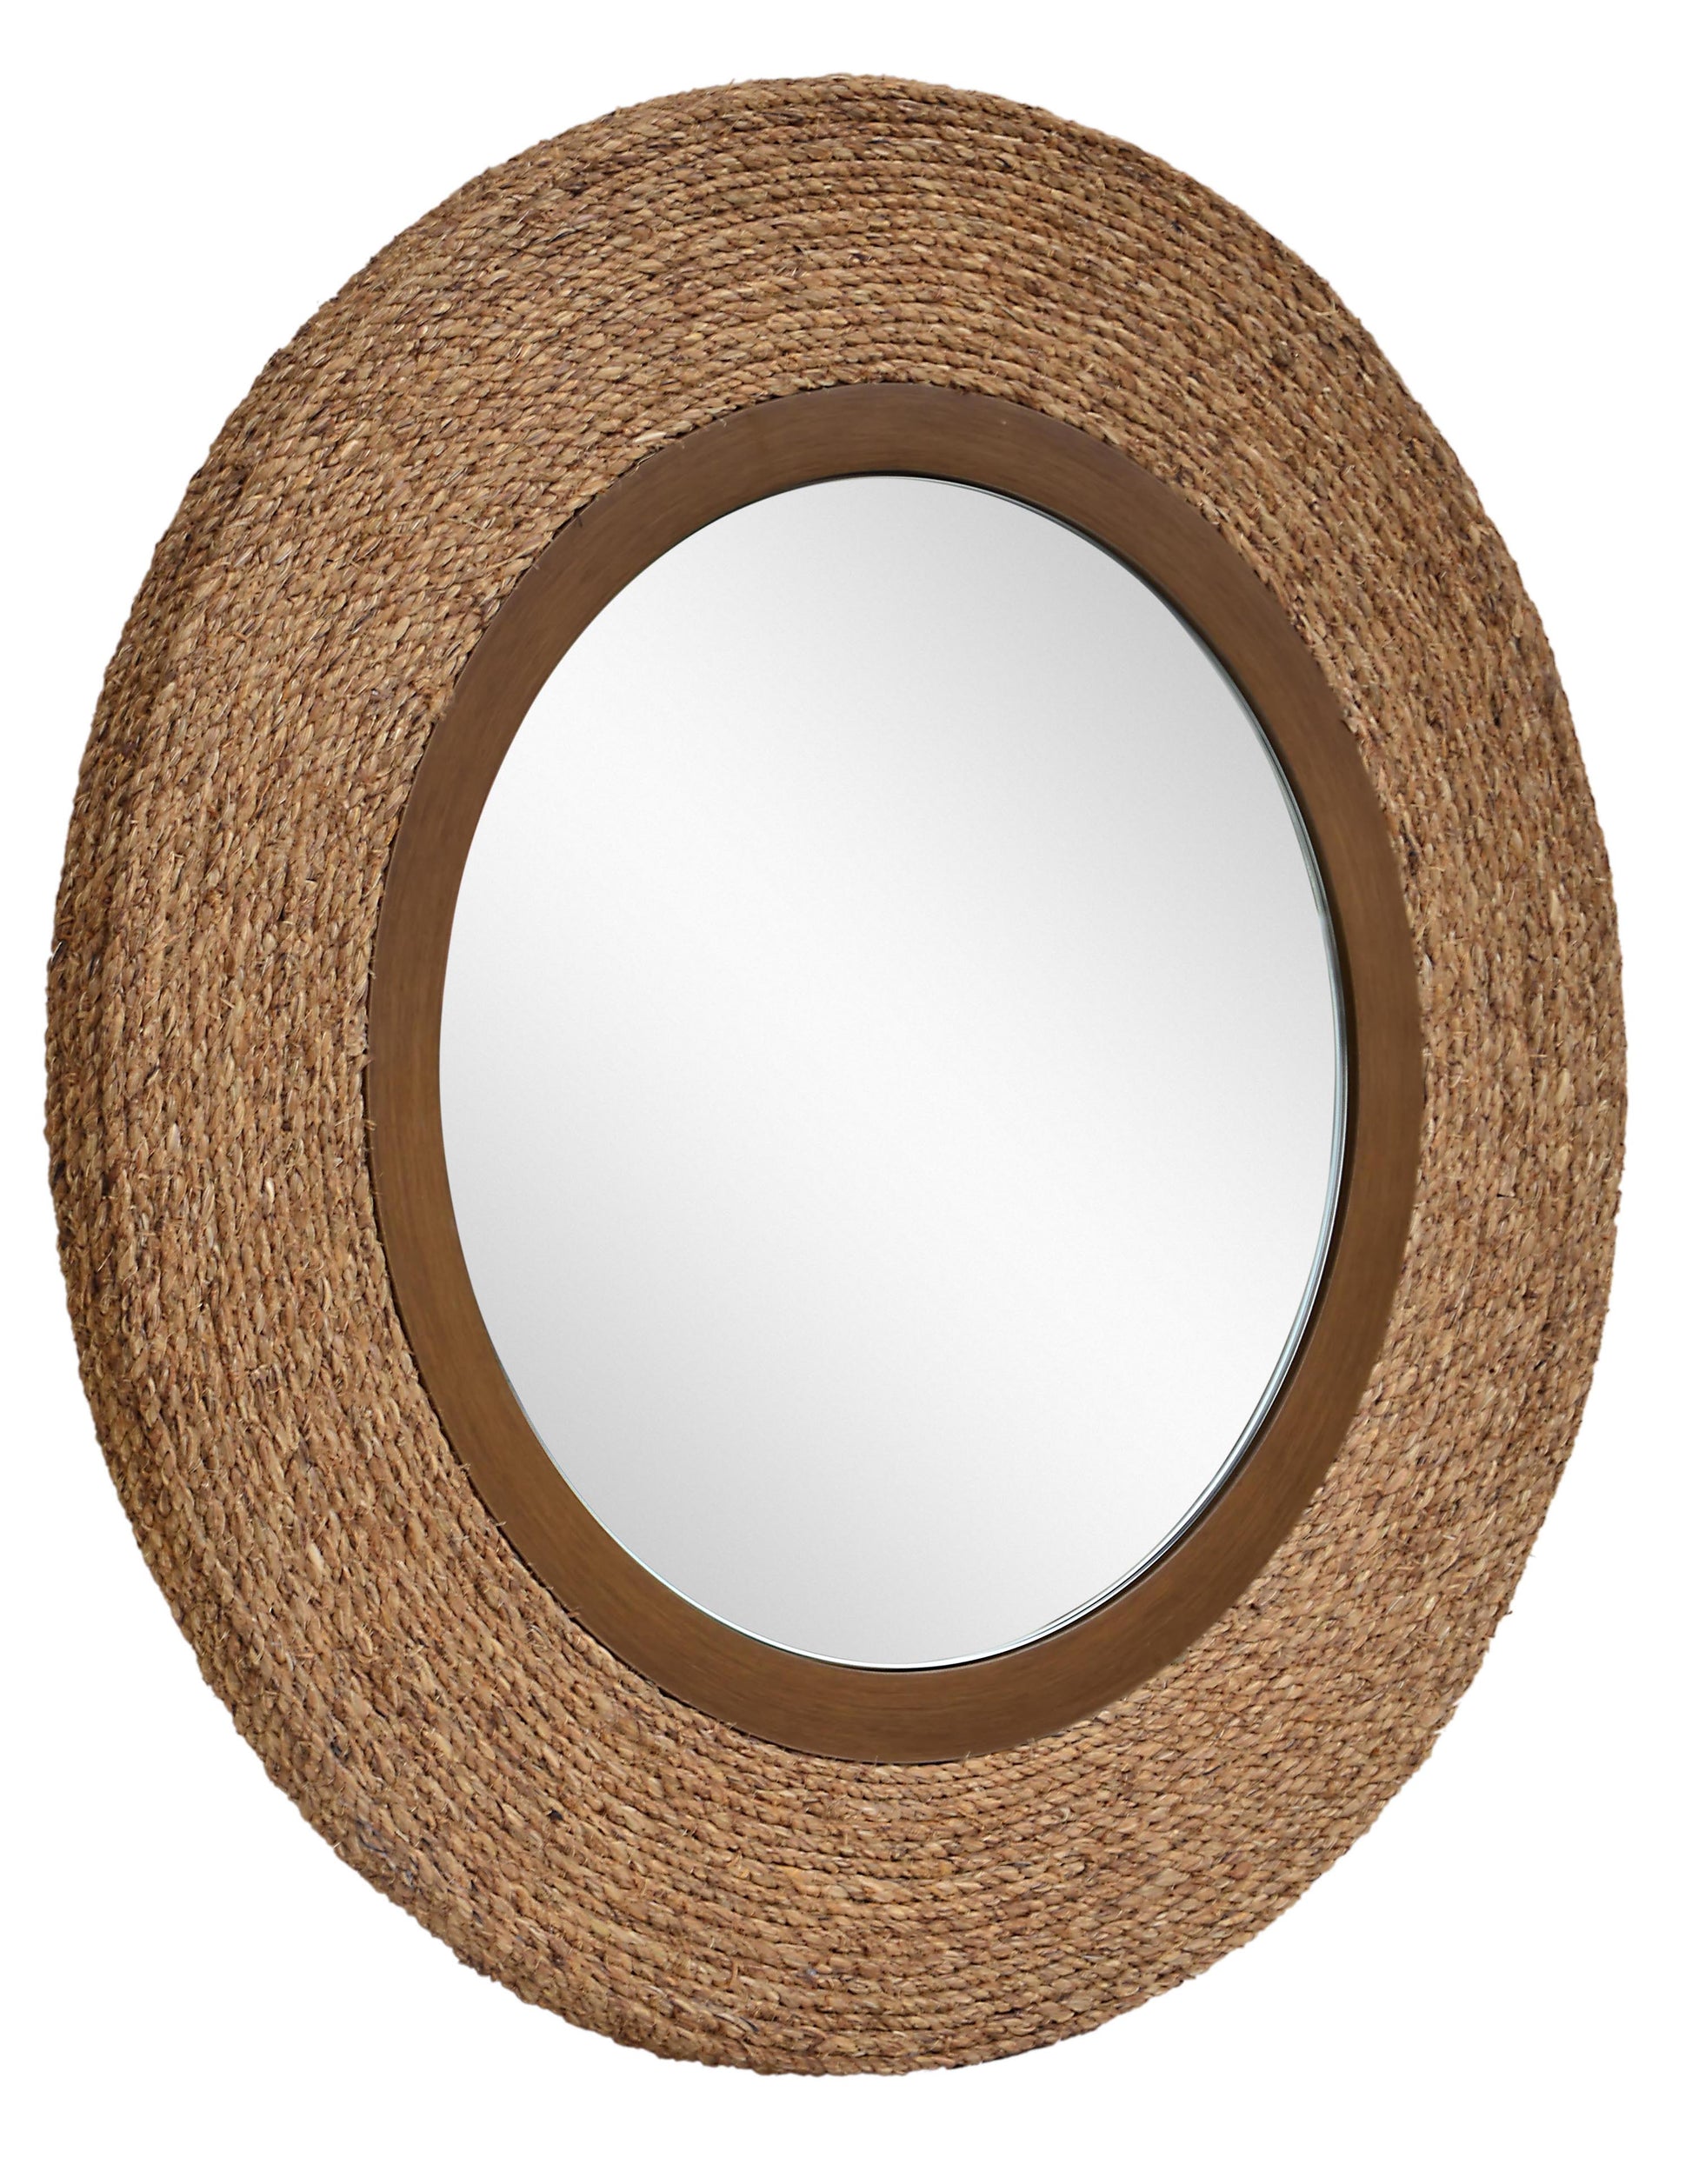 Round mirror with natural rope